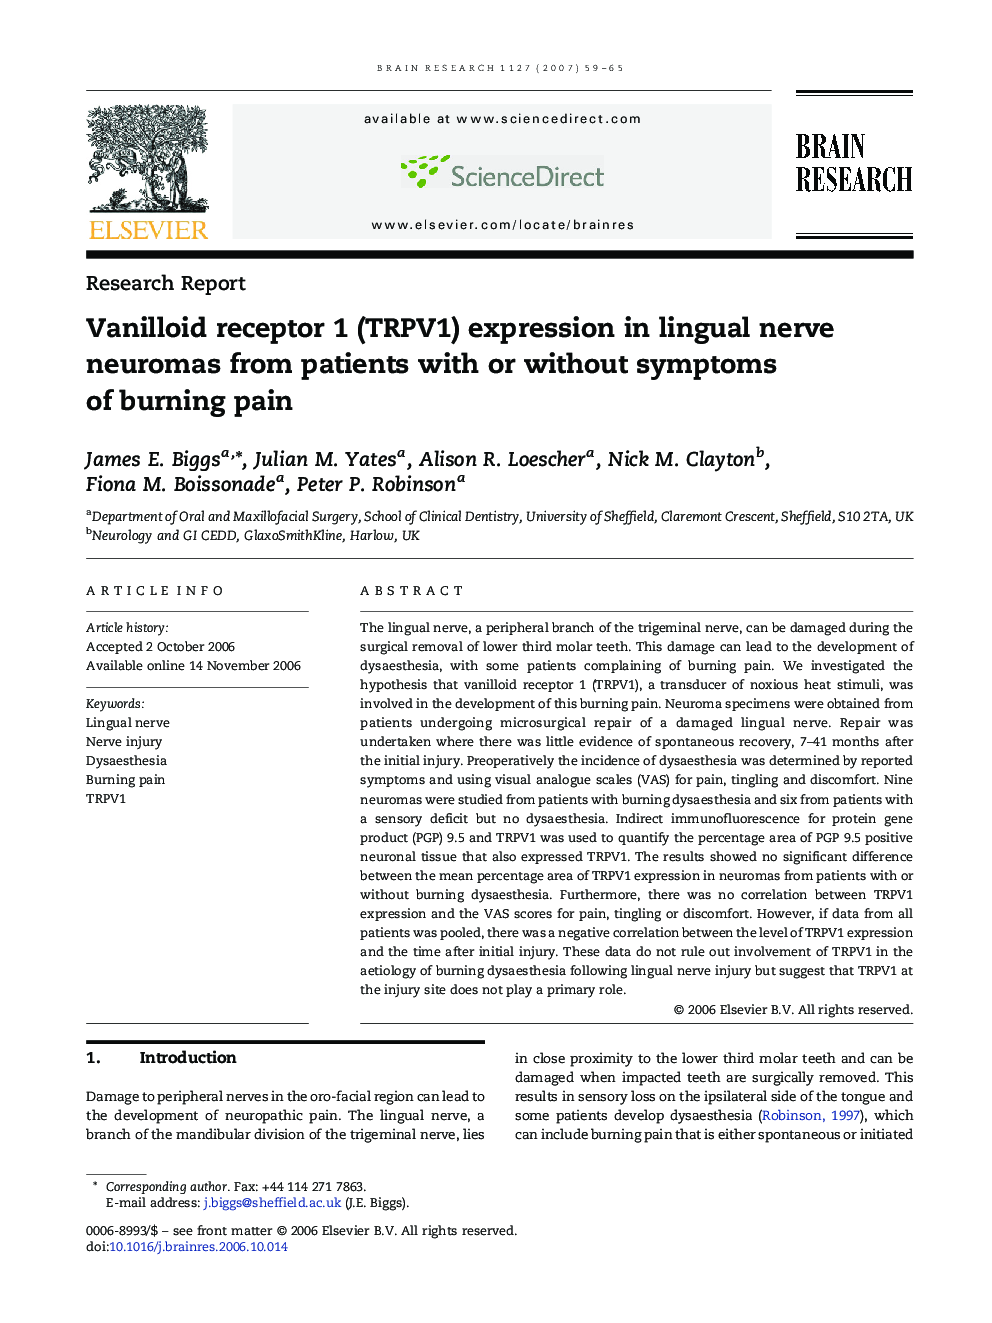 Vanilloid receptor 1 (TRPV1) expression in lingual nerve neuromas from patients with or without symptoms of burning pain